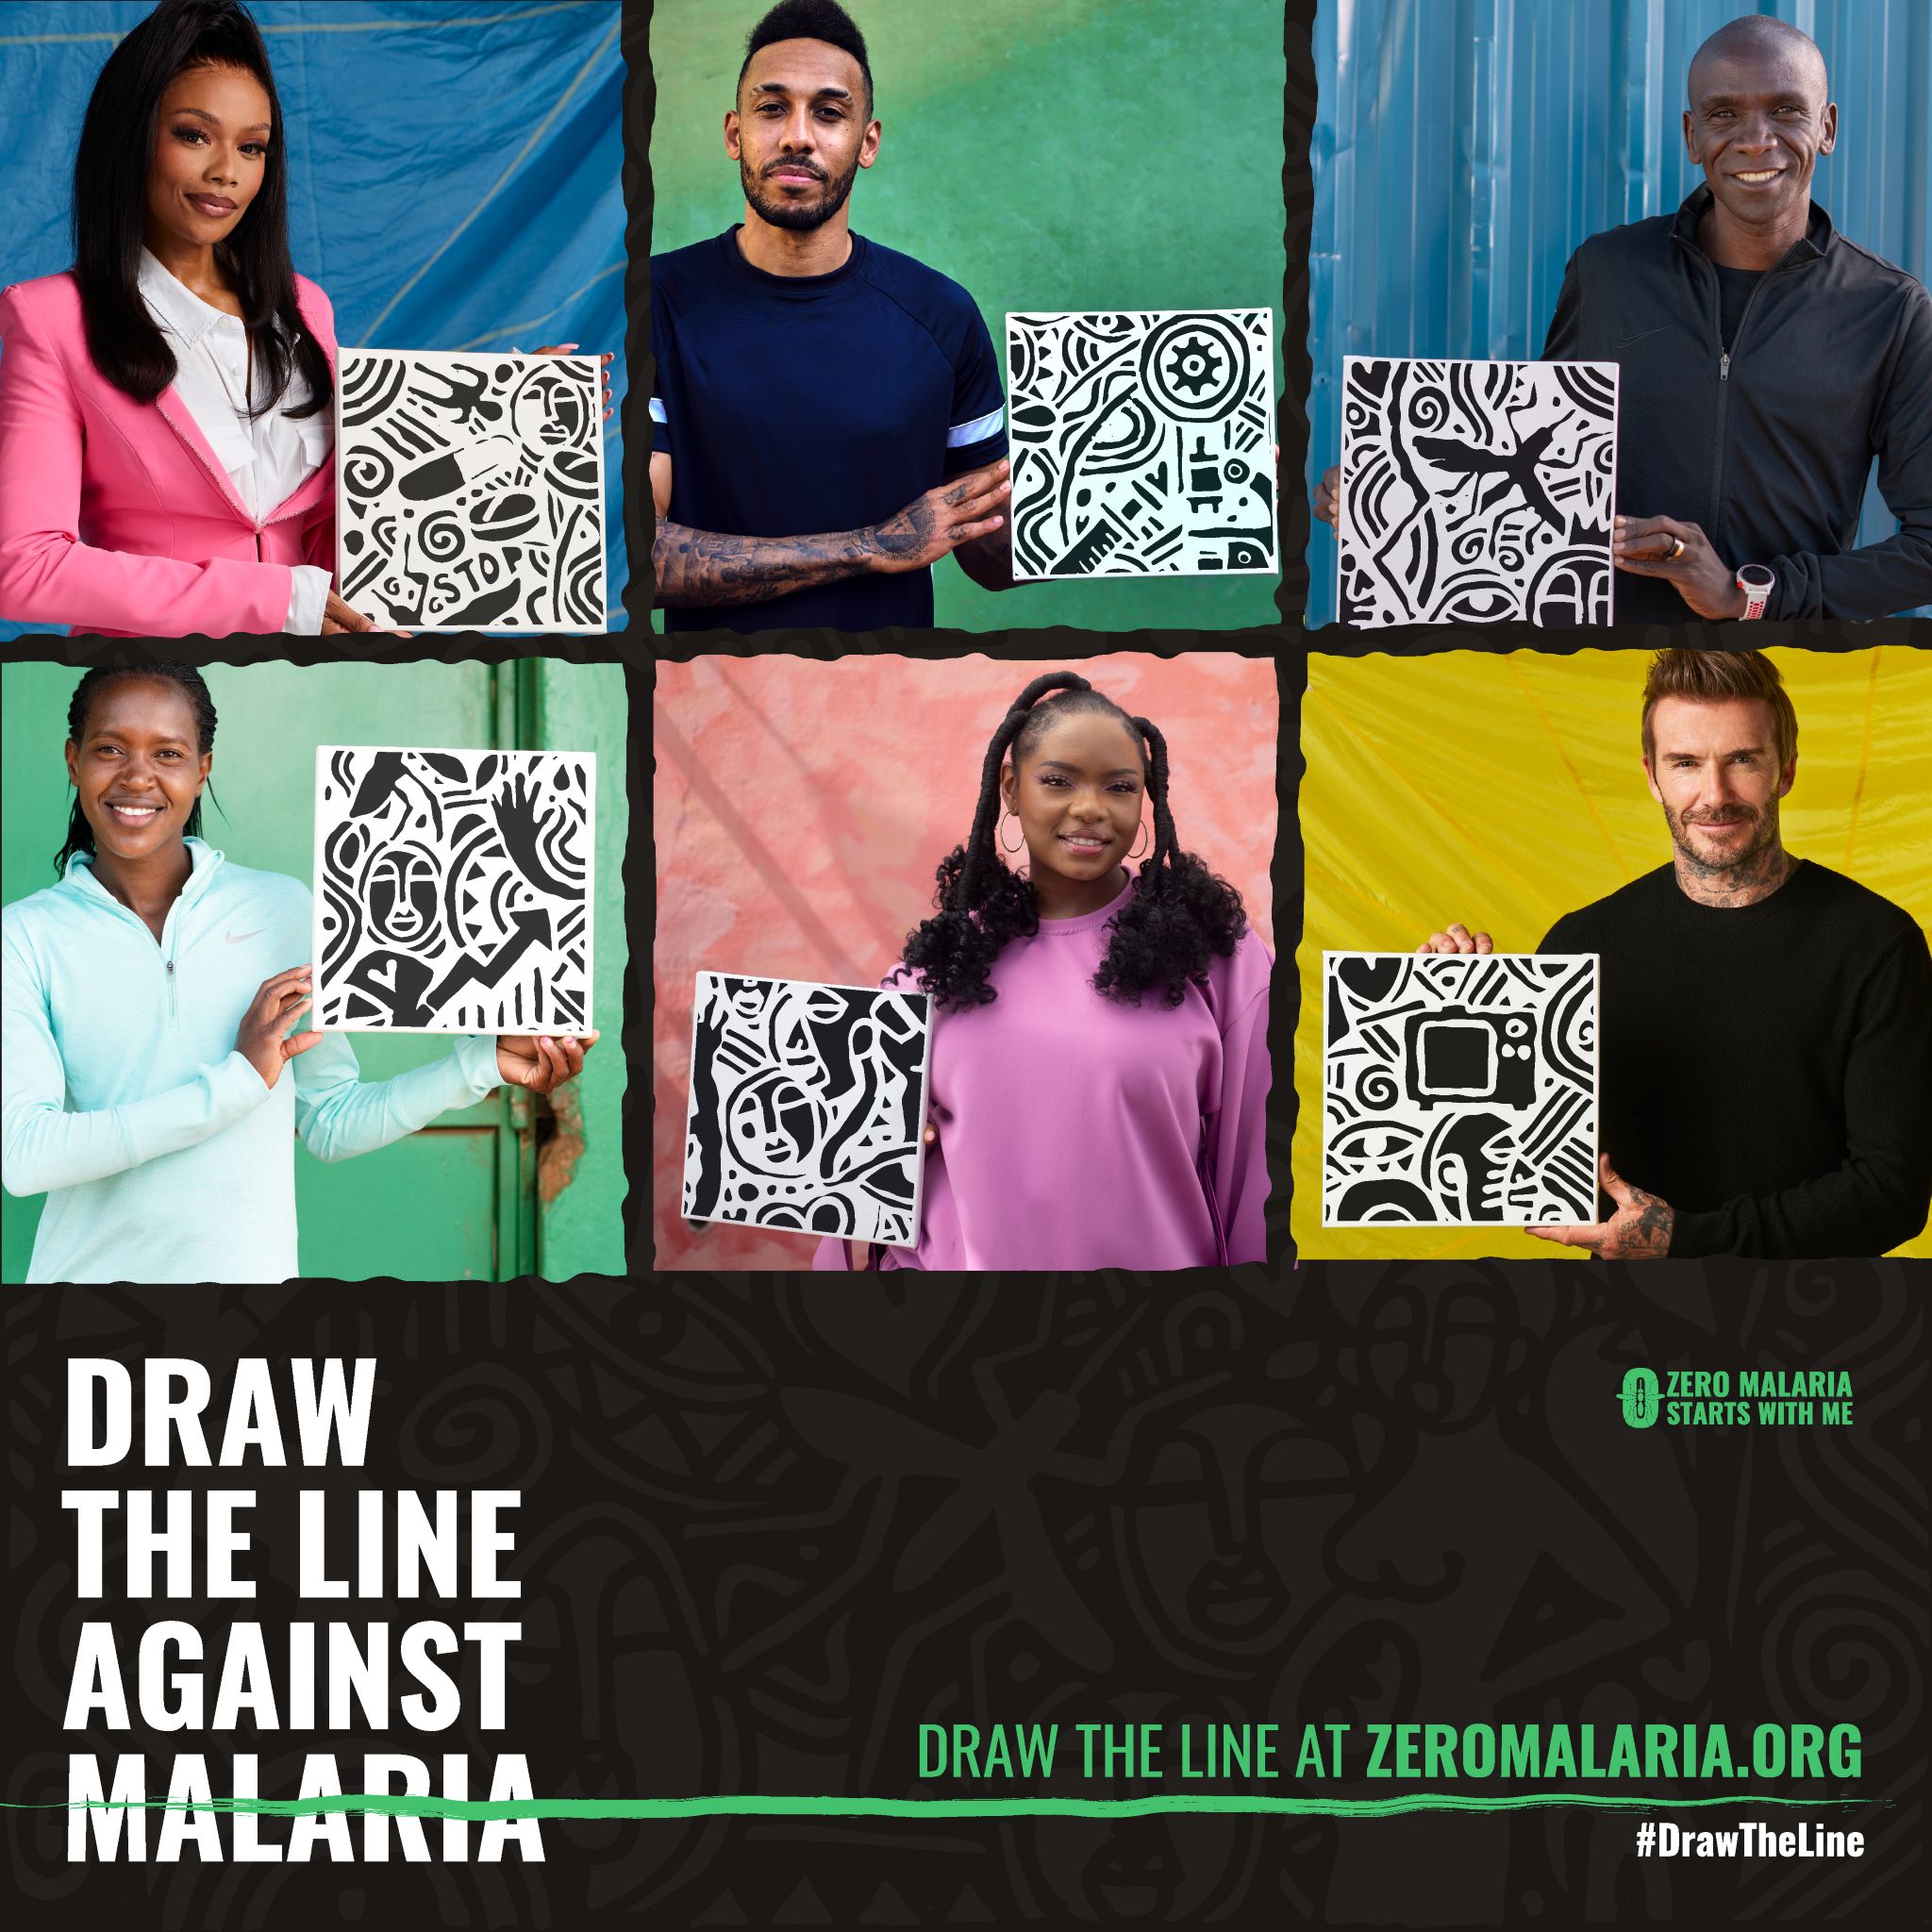 Draw the Line Against Malaria